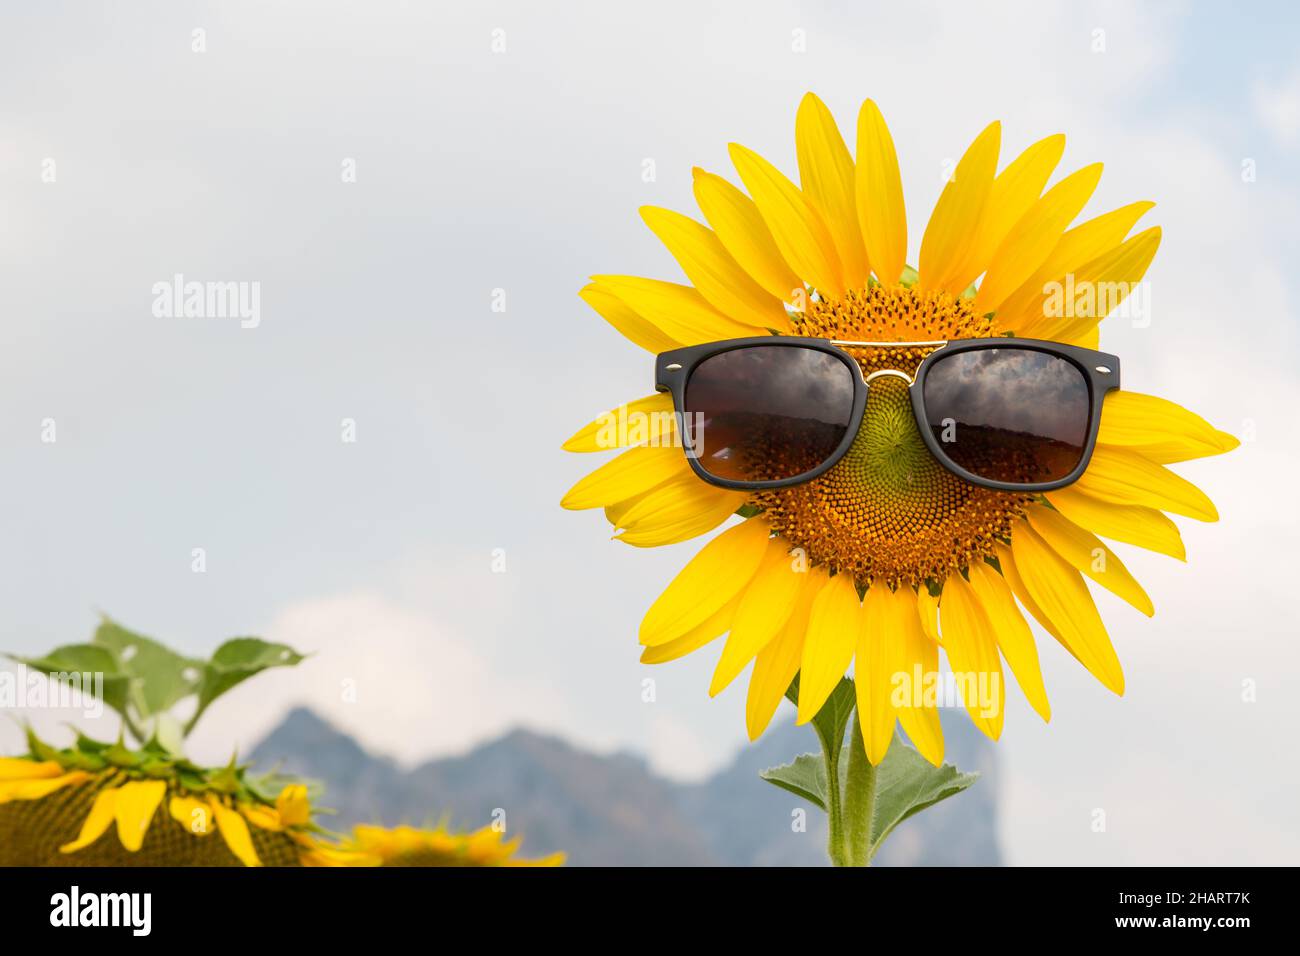 sunflower wear a sunglasses with blue sky background Stock Photo